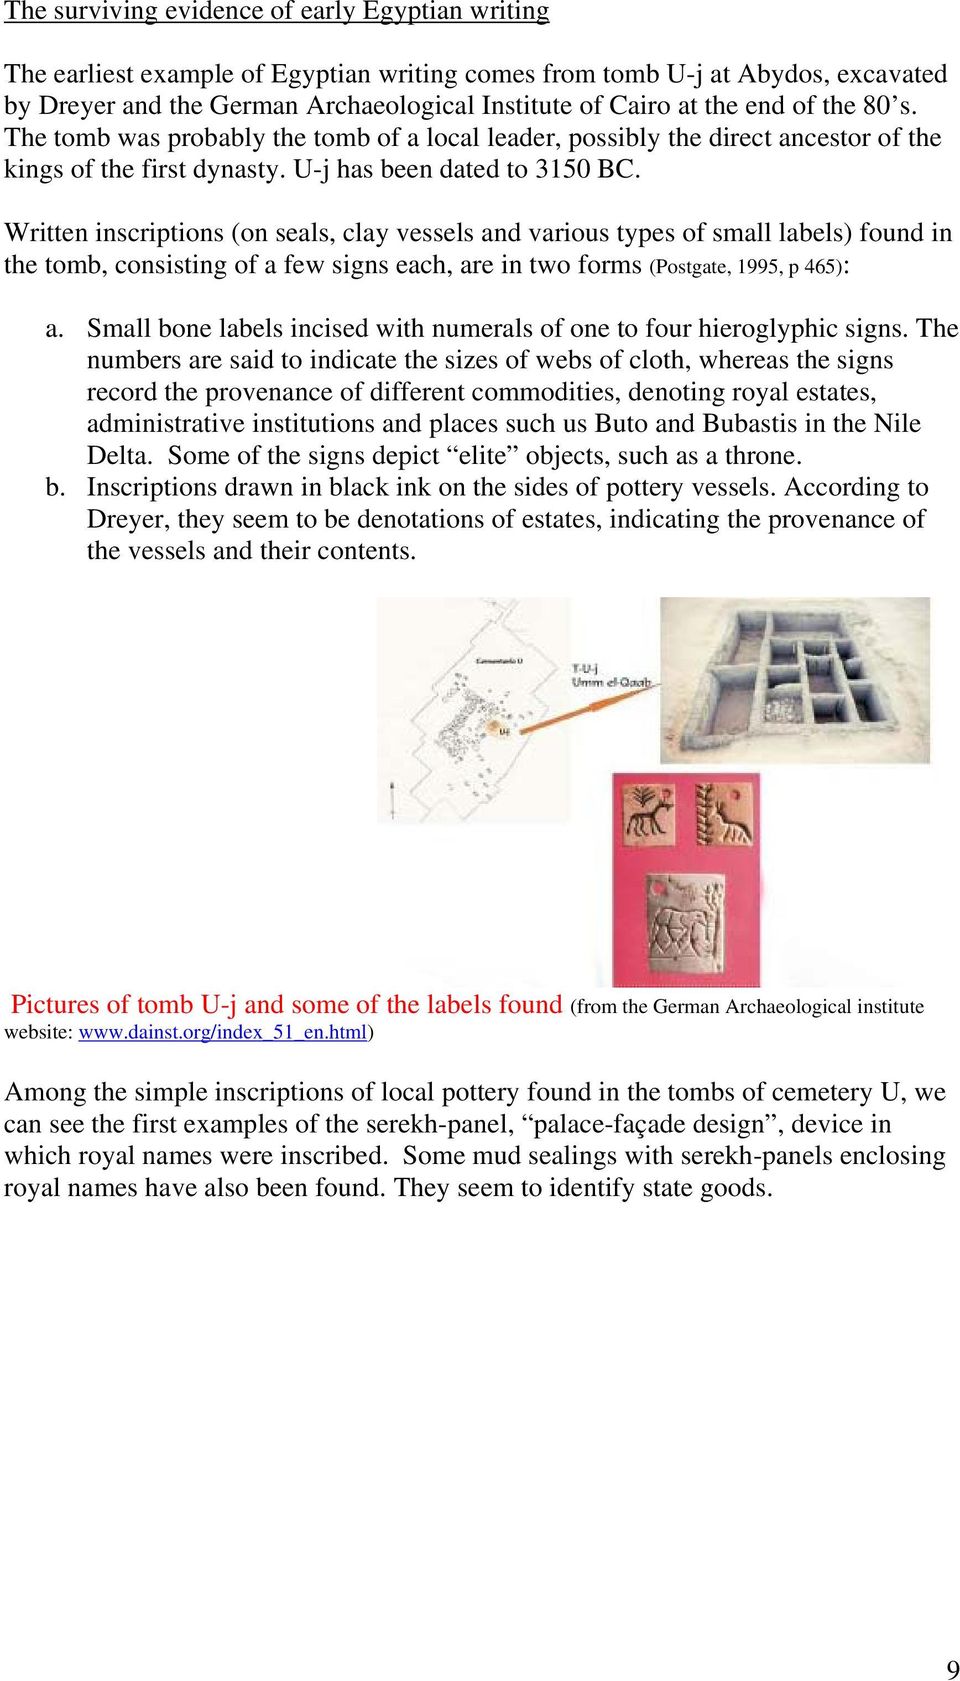 Written inscriptions (on seals, clay vessels and various types of small labels) found in the tomb, consisting of a few signs each, are in two forms (Postgate, 1995, p 465): a.